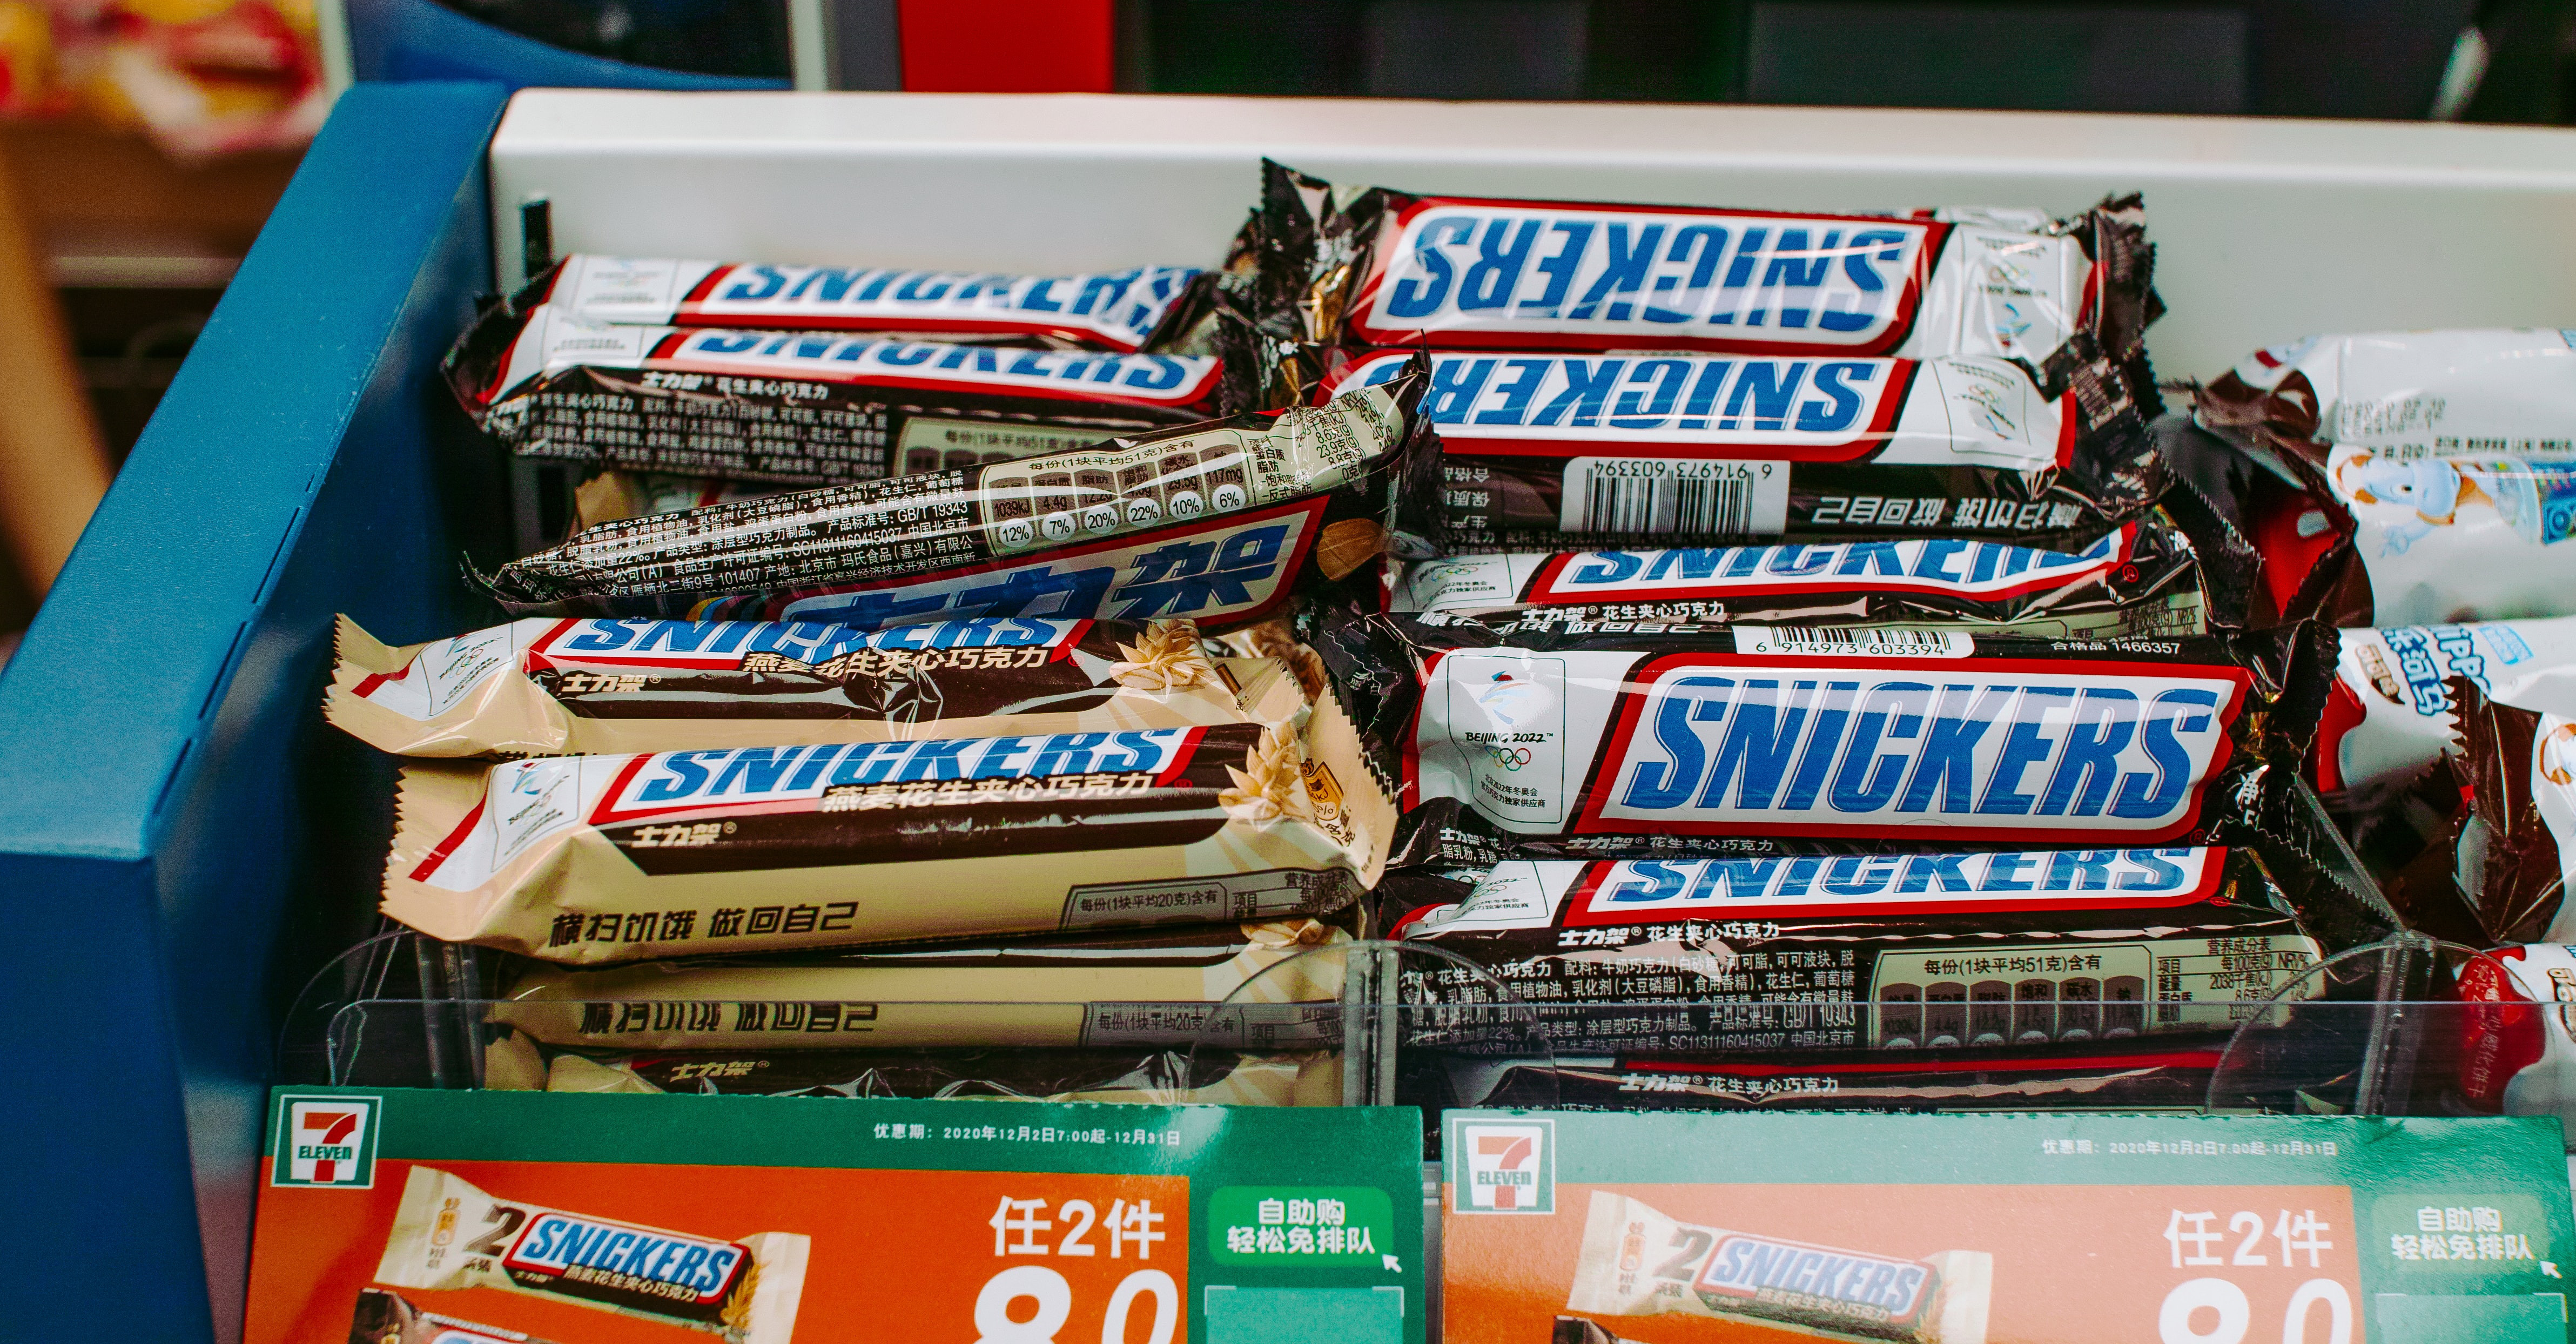 Will Intermittent Fasting while Working Make Me Underperform? Snickers bars